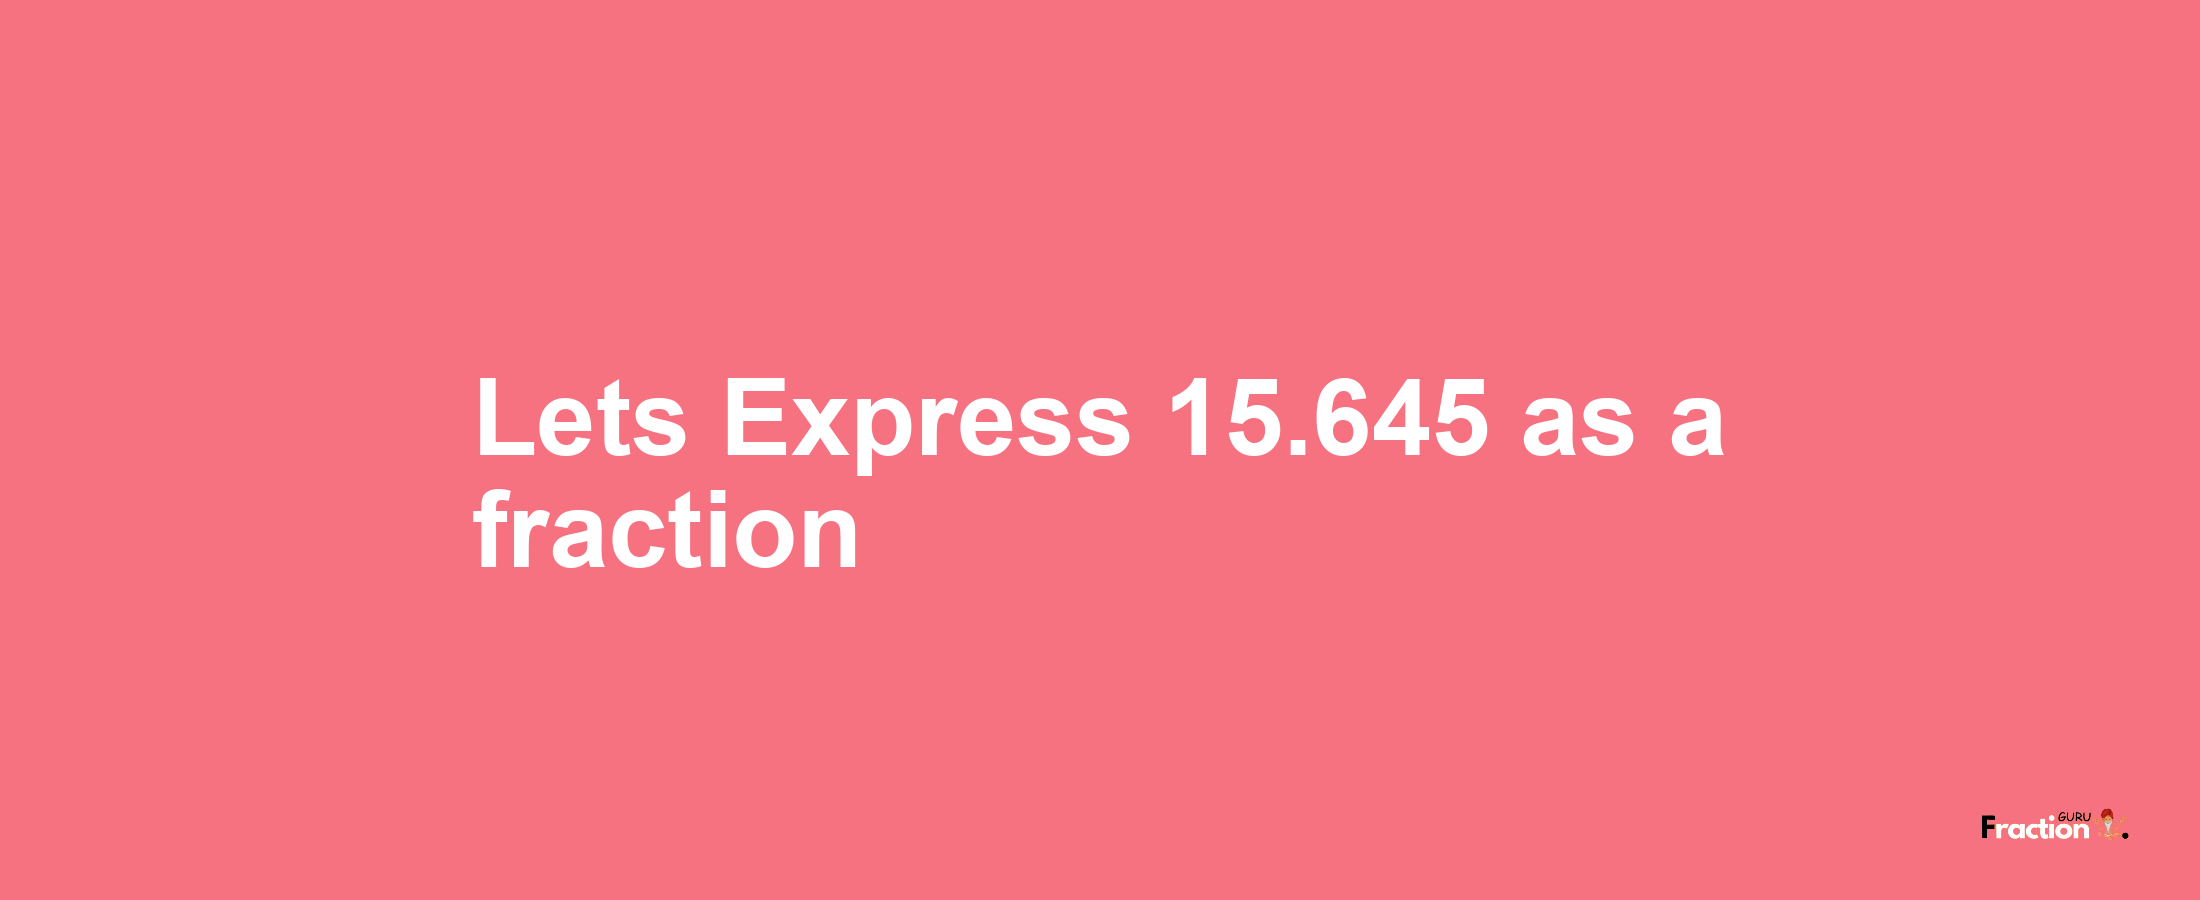 Lets Express 15.645 as afraction